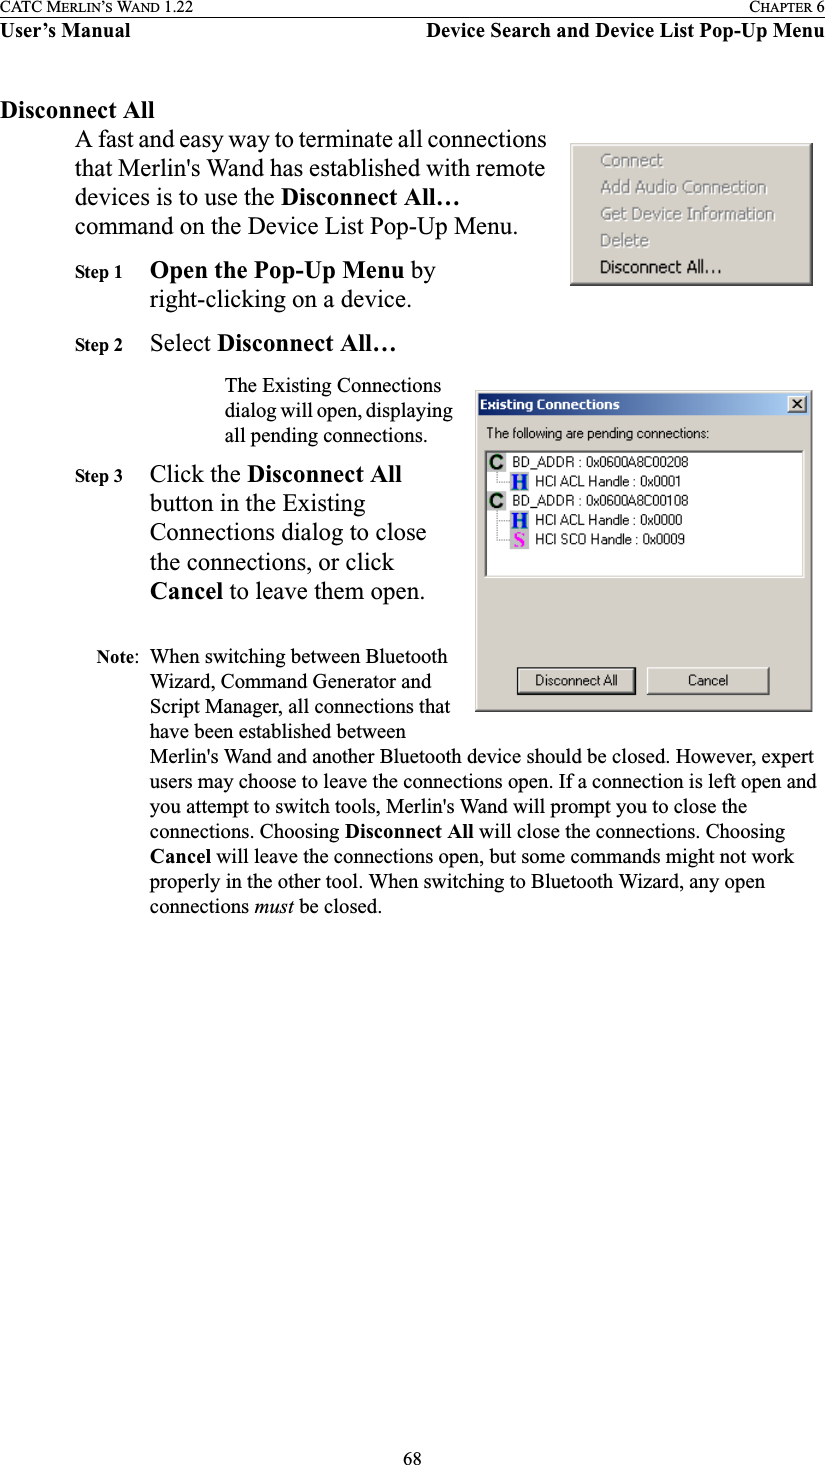 68CATC MERLIN’S WAND 1.22 CHAPTER 6User’s Manual Device Search and Device List Pop-Up MenuDisconnect AllA fast and easy way to terminate all connections that Merlin&apos;s Wand has established with remote devices is to use the Disconnect All… command on the Device List Pop-Up Menu.Step 1 Open the Pop-Up Menu by right-clicking on a device.Step 2 Select Disconnect All…The Existing Connections dialog will open, displaying all pending connections.Step 3 Click the Disconnect All button in the Existing Connections dialog to close the connections, or click Cancel to leave them open.Note: When switching between Bluetooth Wizard, Command Generator and Script Manager, all connections that have been established between Merlin&apos;s Wand and another Bluetooth device should be closed. However, expert users may choose to leave the connections open. If a connection is left open and you attempt to switch tools, Merlin&apos;s Wand will prompt you to close the connections. Choosing Disconnect All will close the connections. Choosing Cancel will leave the connections open, but some commands might not work properly in the other tool. When switching to Bluetooth Wizard, any open connections must be closed.